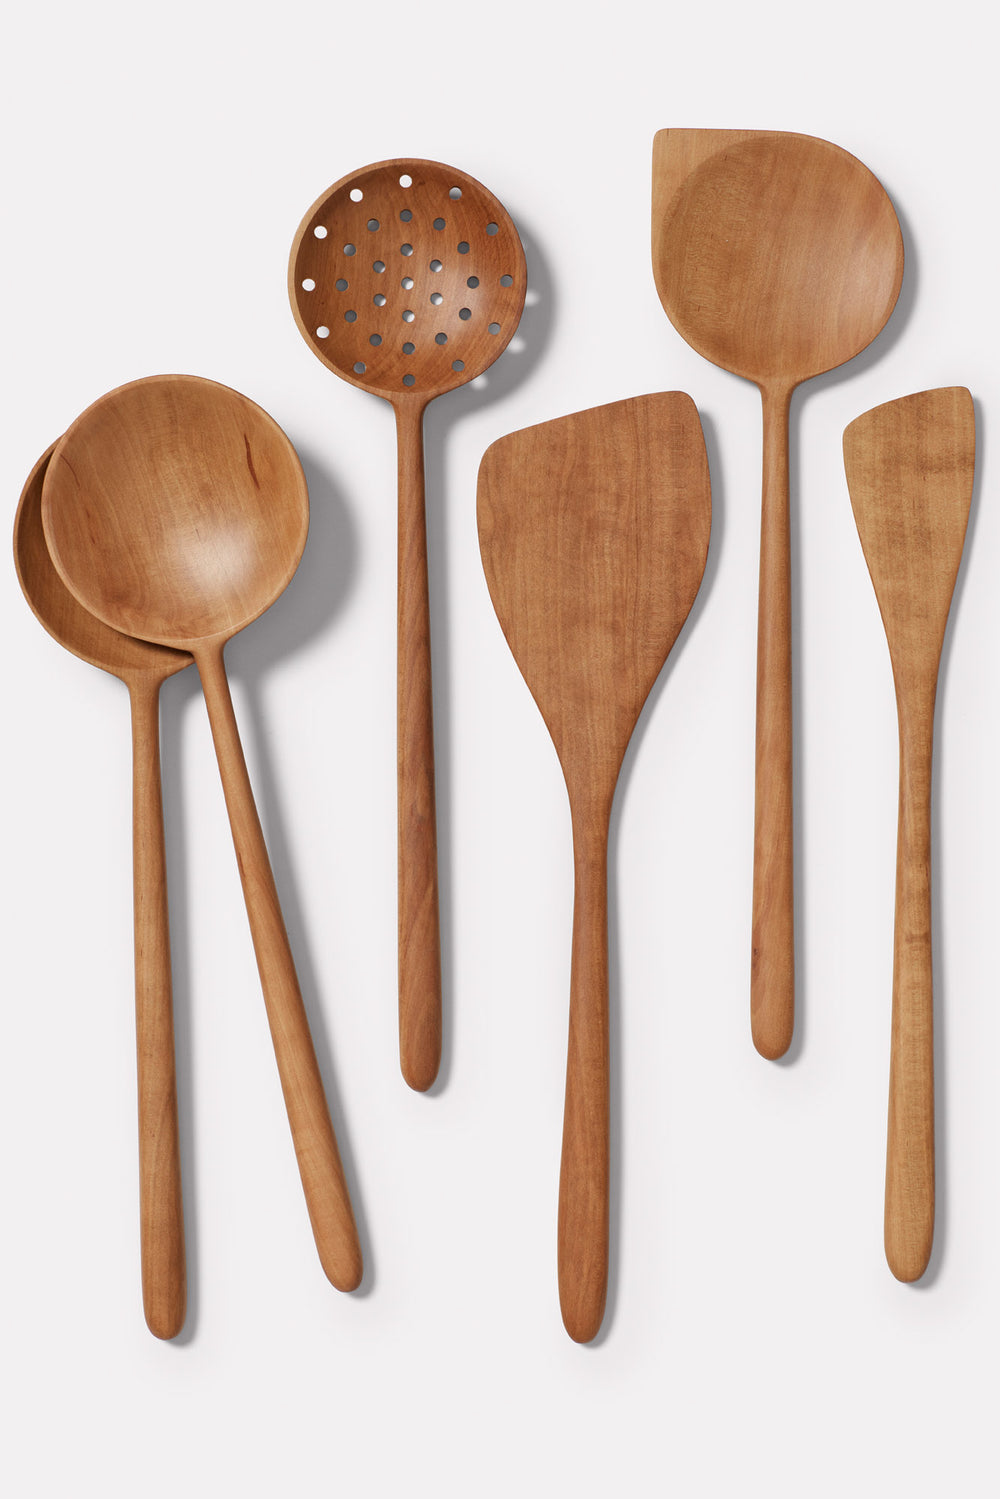 Wooden Two-in-One Spoon - Pear